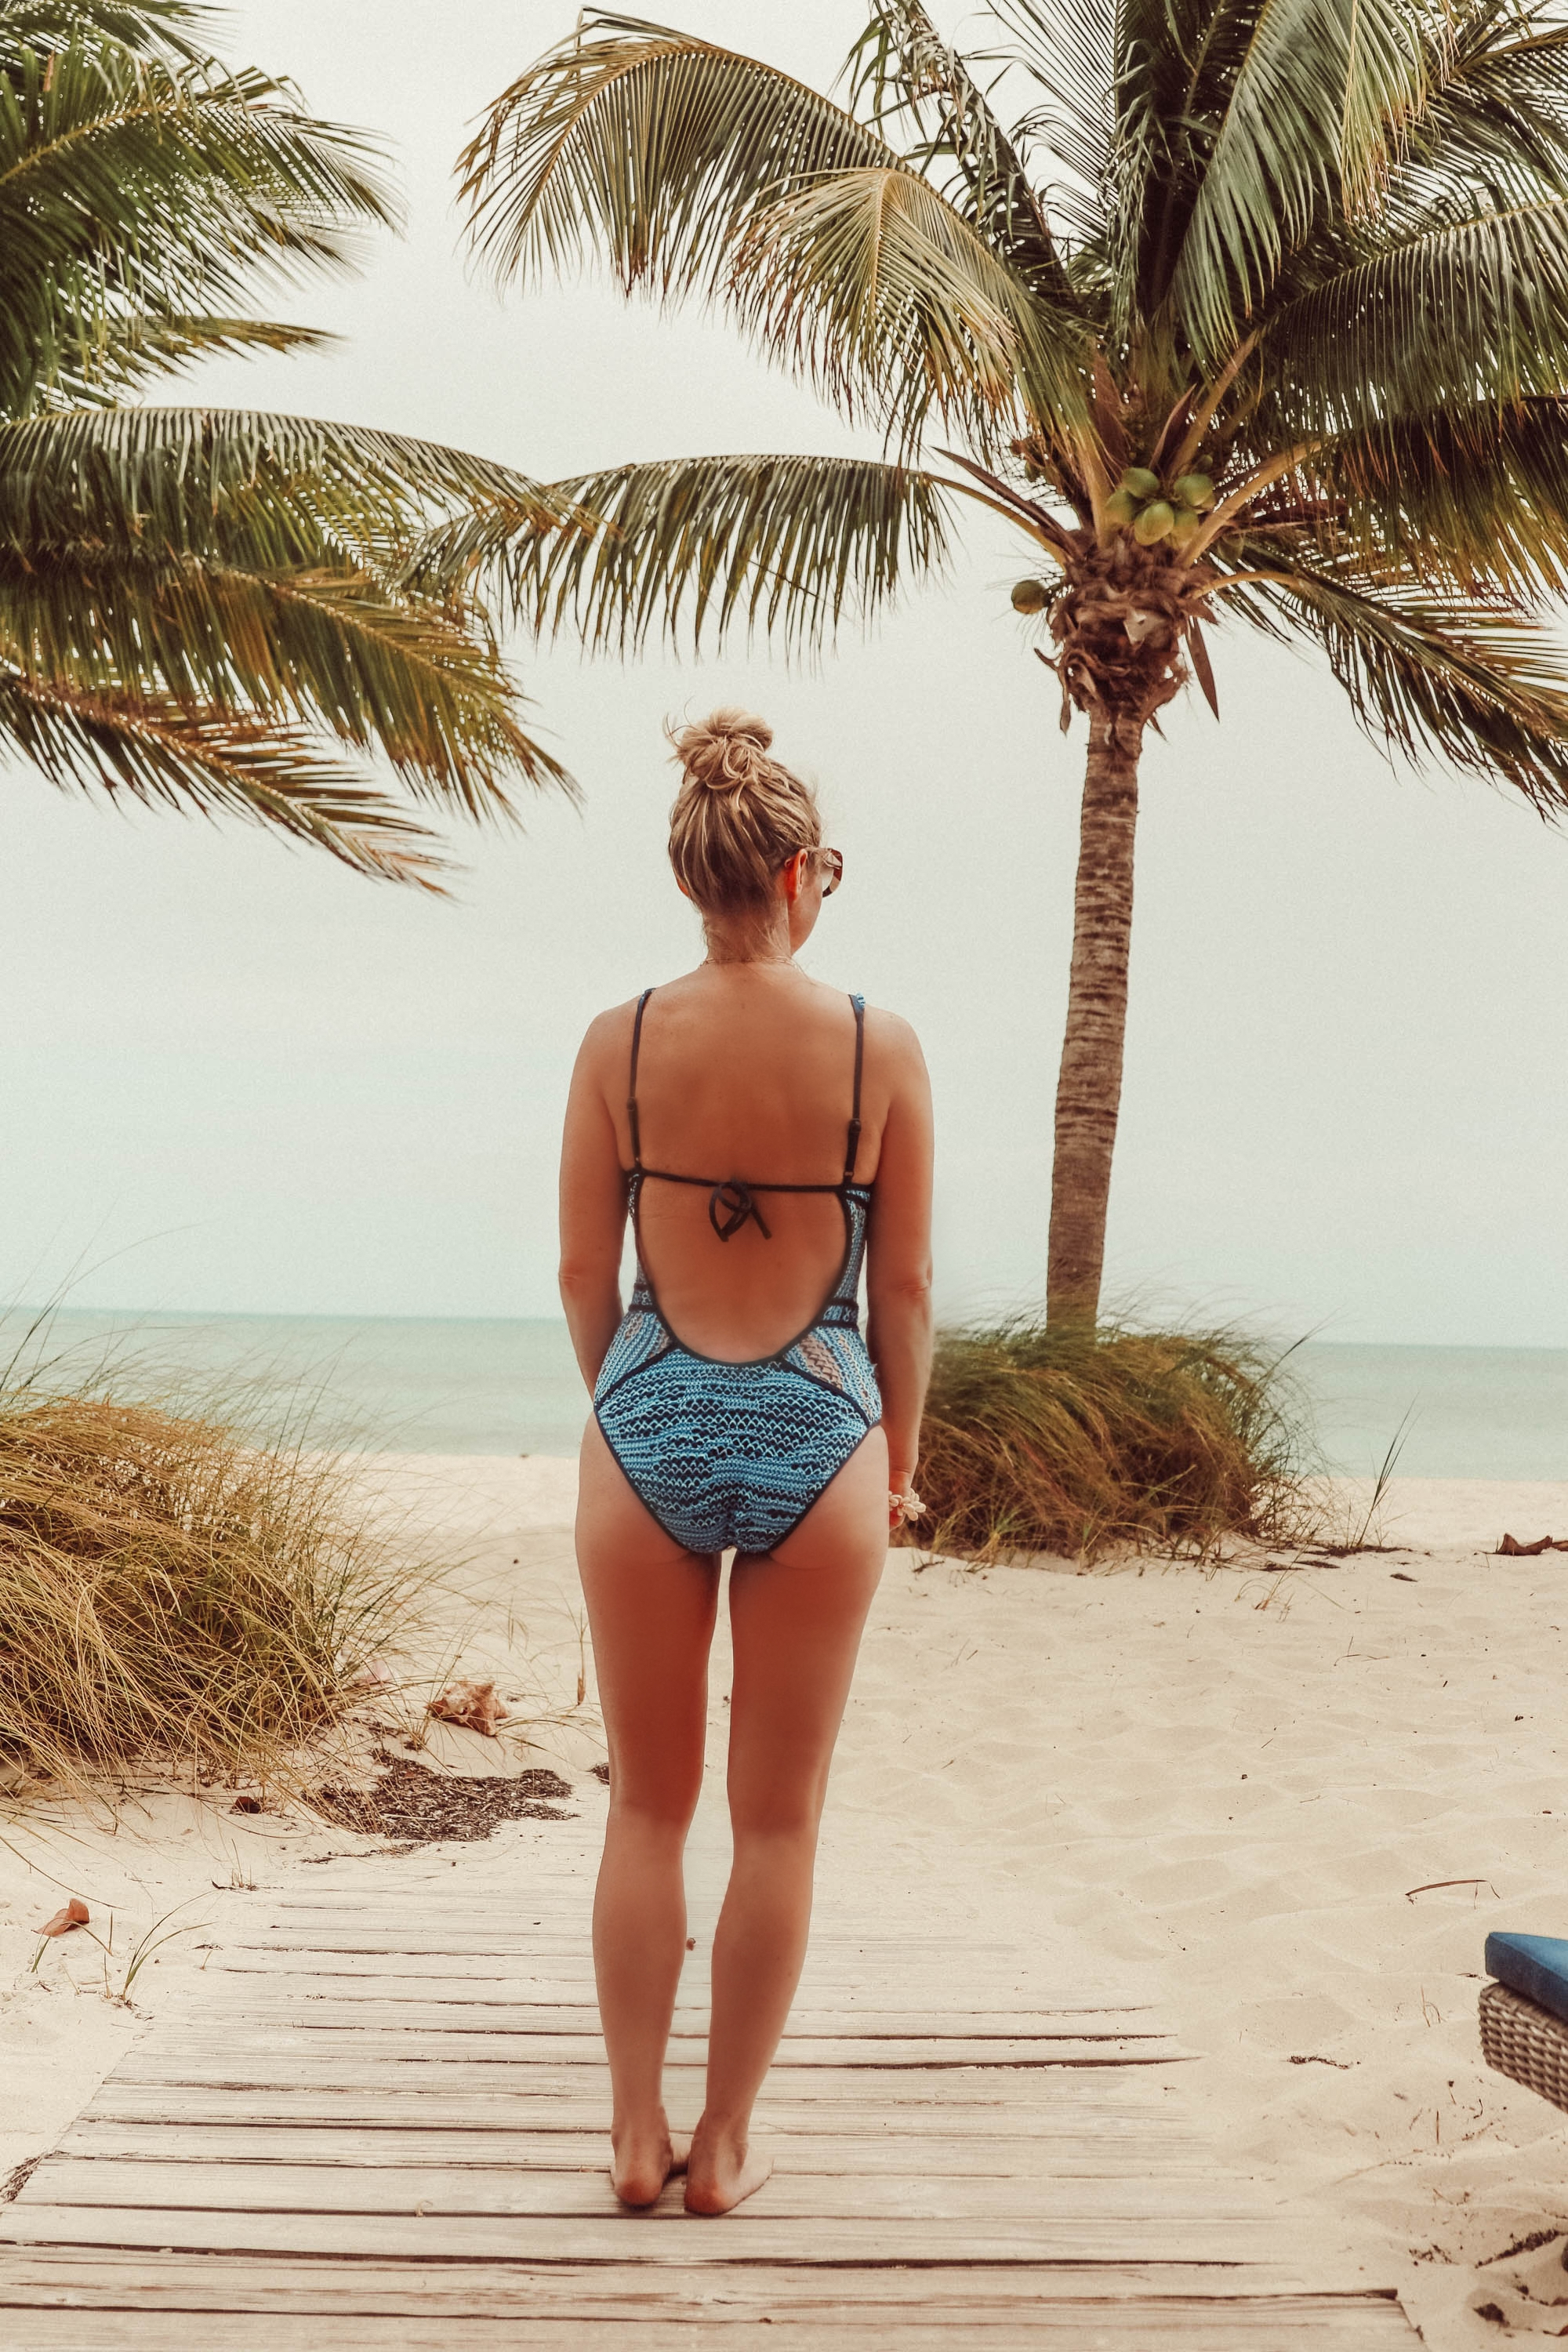 Flattering Swimsuits, Fashion blogger Erin Busbee of BusbeeStyle.com wearing a blue Becca one piece with plunge neckline in the Bahamas, Flattering Swimsuits For Women Over 40